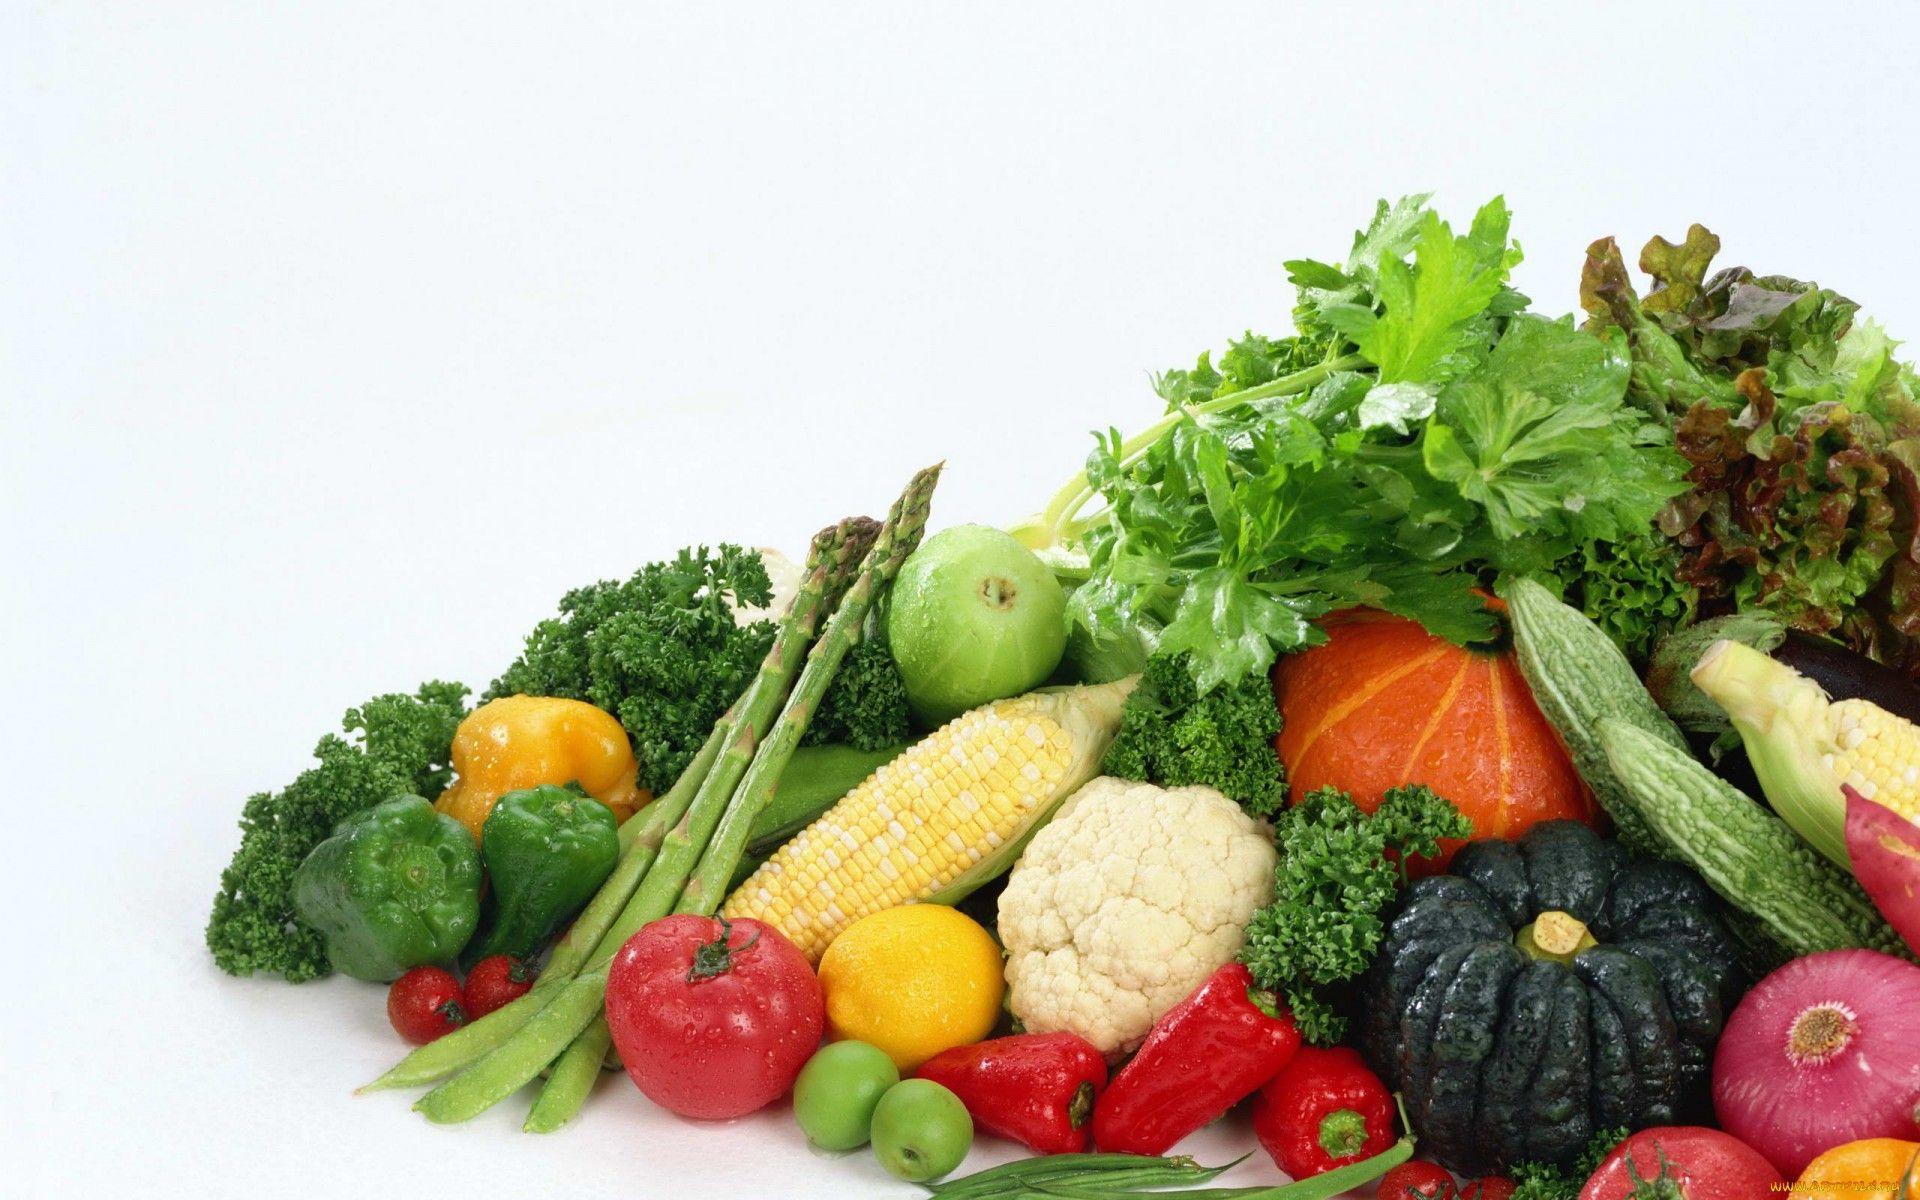 Fruits & Vegetables Wallpaper and Background Image